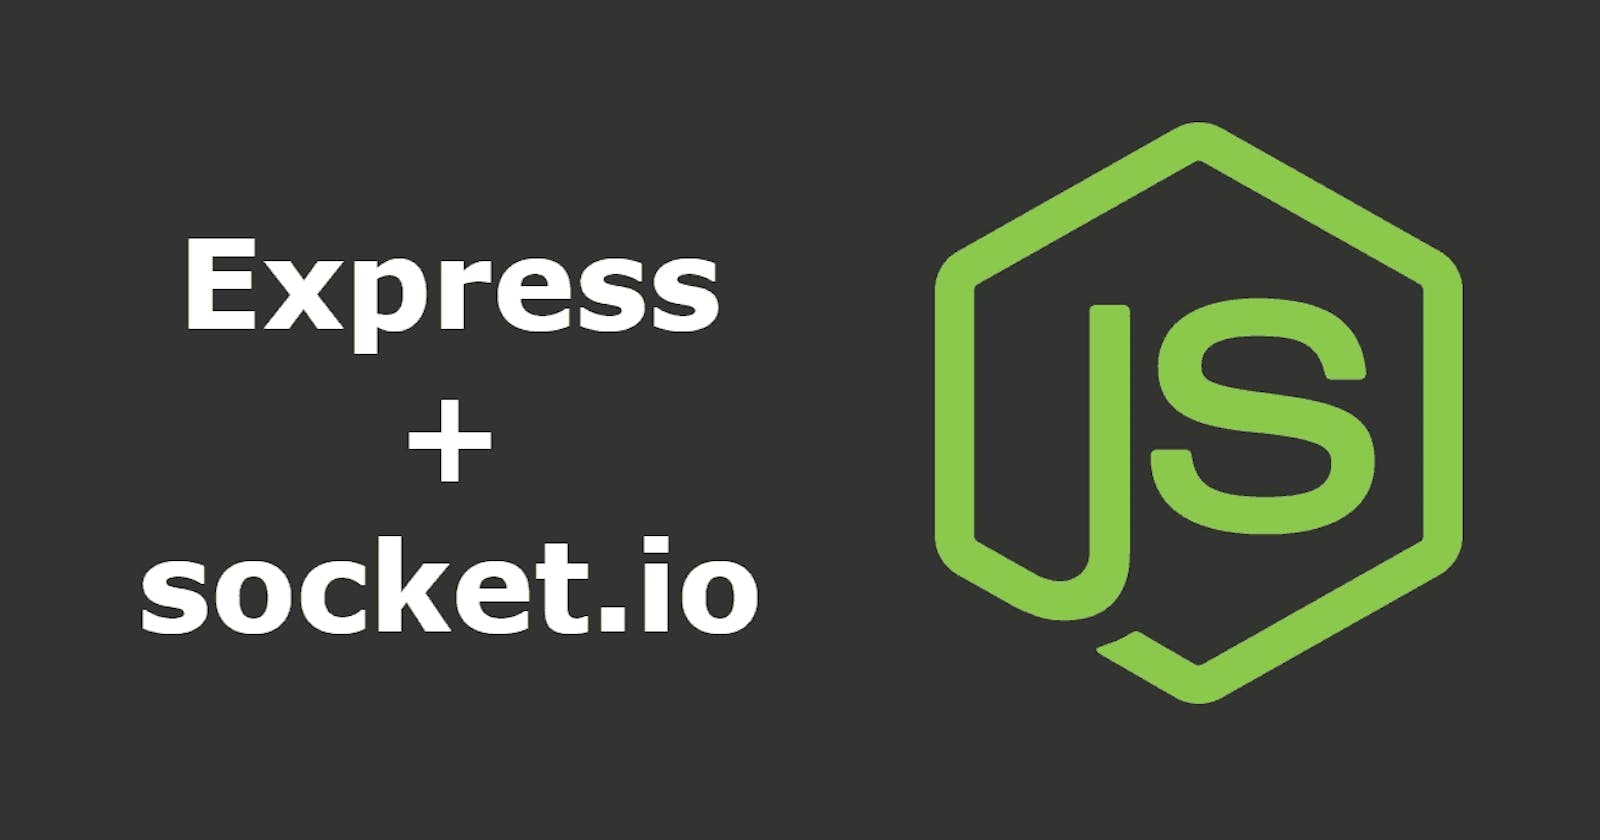 Build a chat application with Express and Socket.io